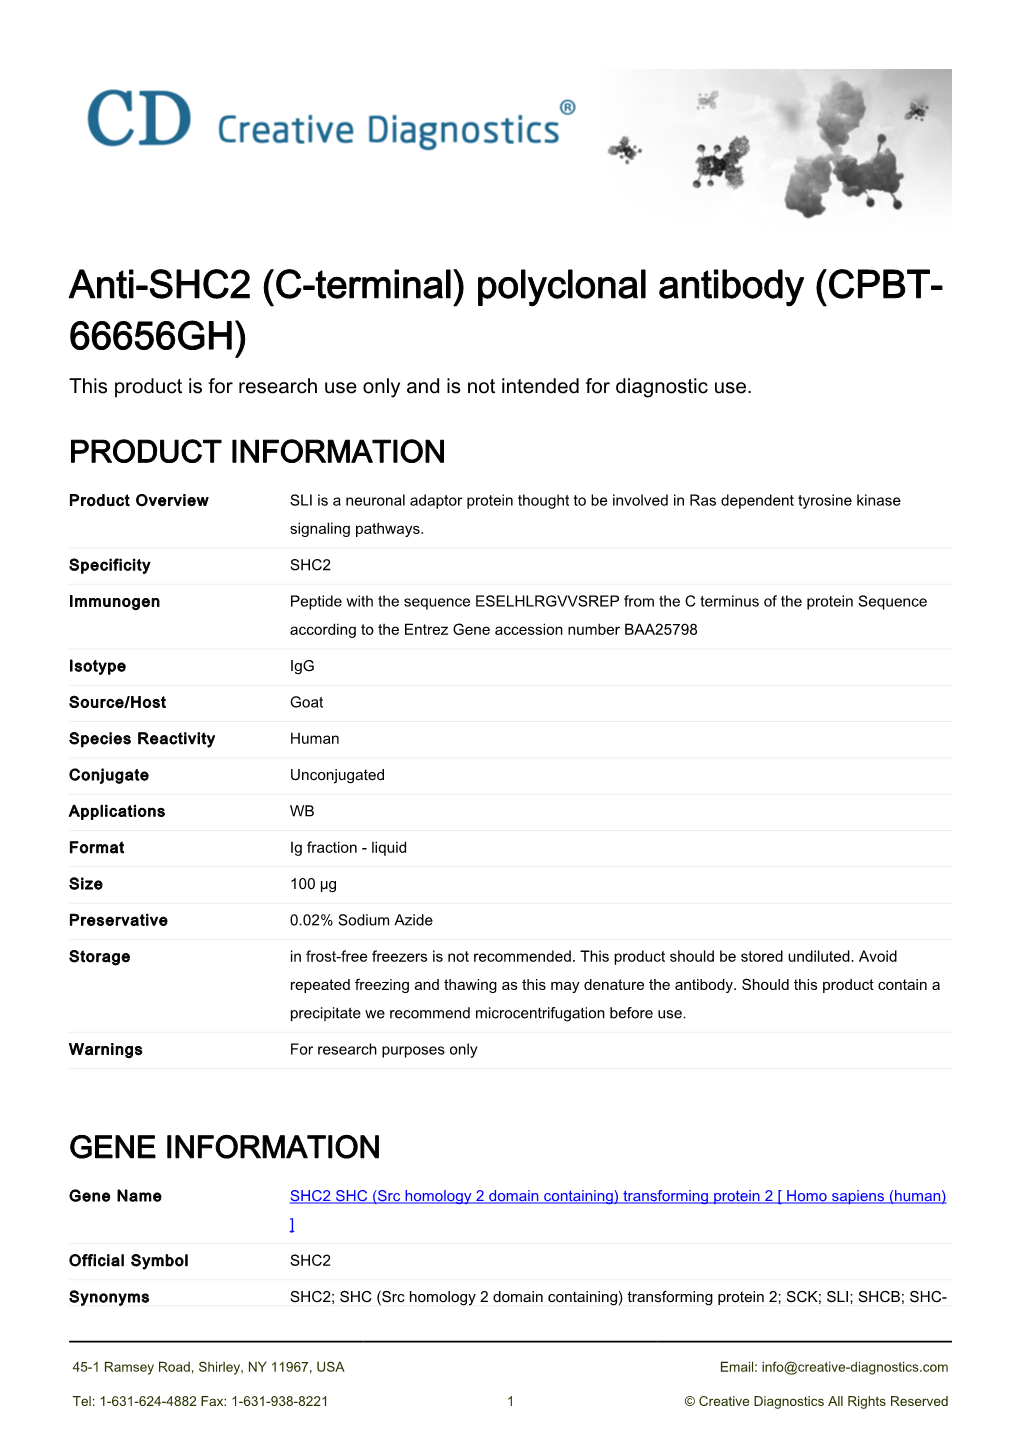 Anti-SHC2 (C-Terminal) Polyclonal Antibody (CPBT- 66656GH) This Product Is for Research Use Only and Is Not Intended for Diagnostic Use